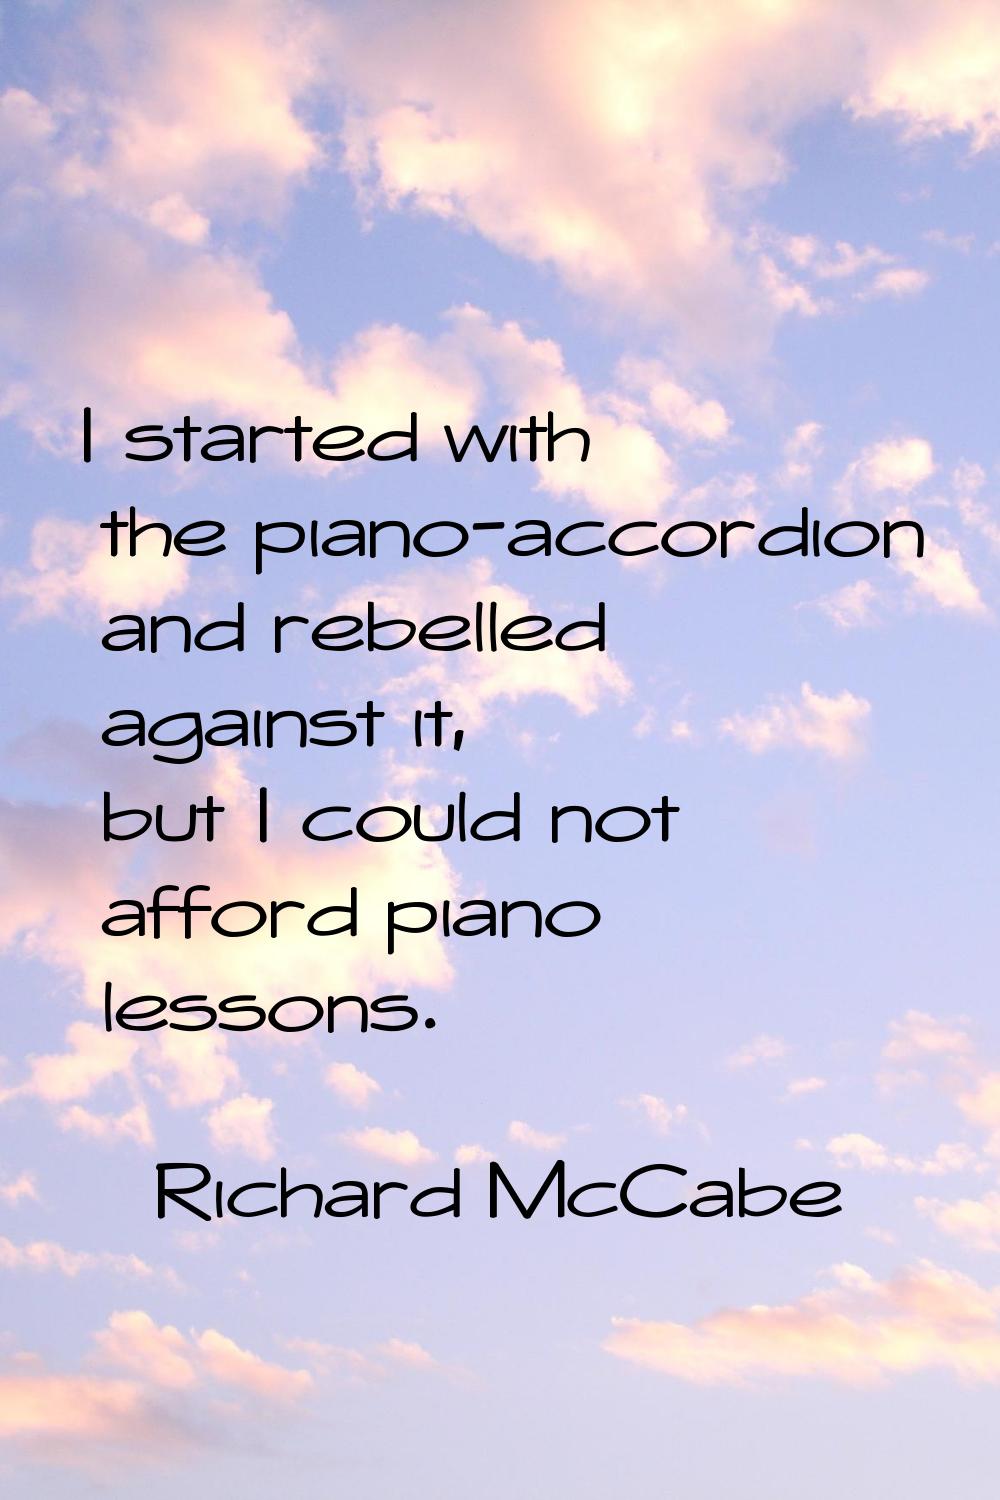 I started with the piano-accordion and rebelled against it, but I could not afford piano lessons.